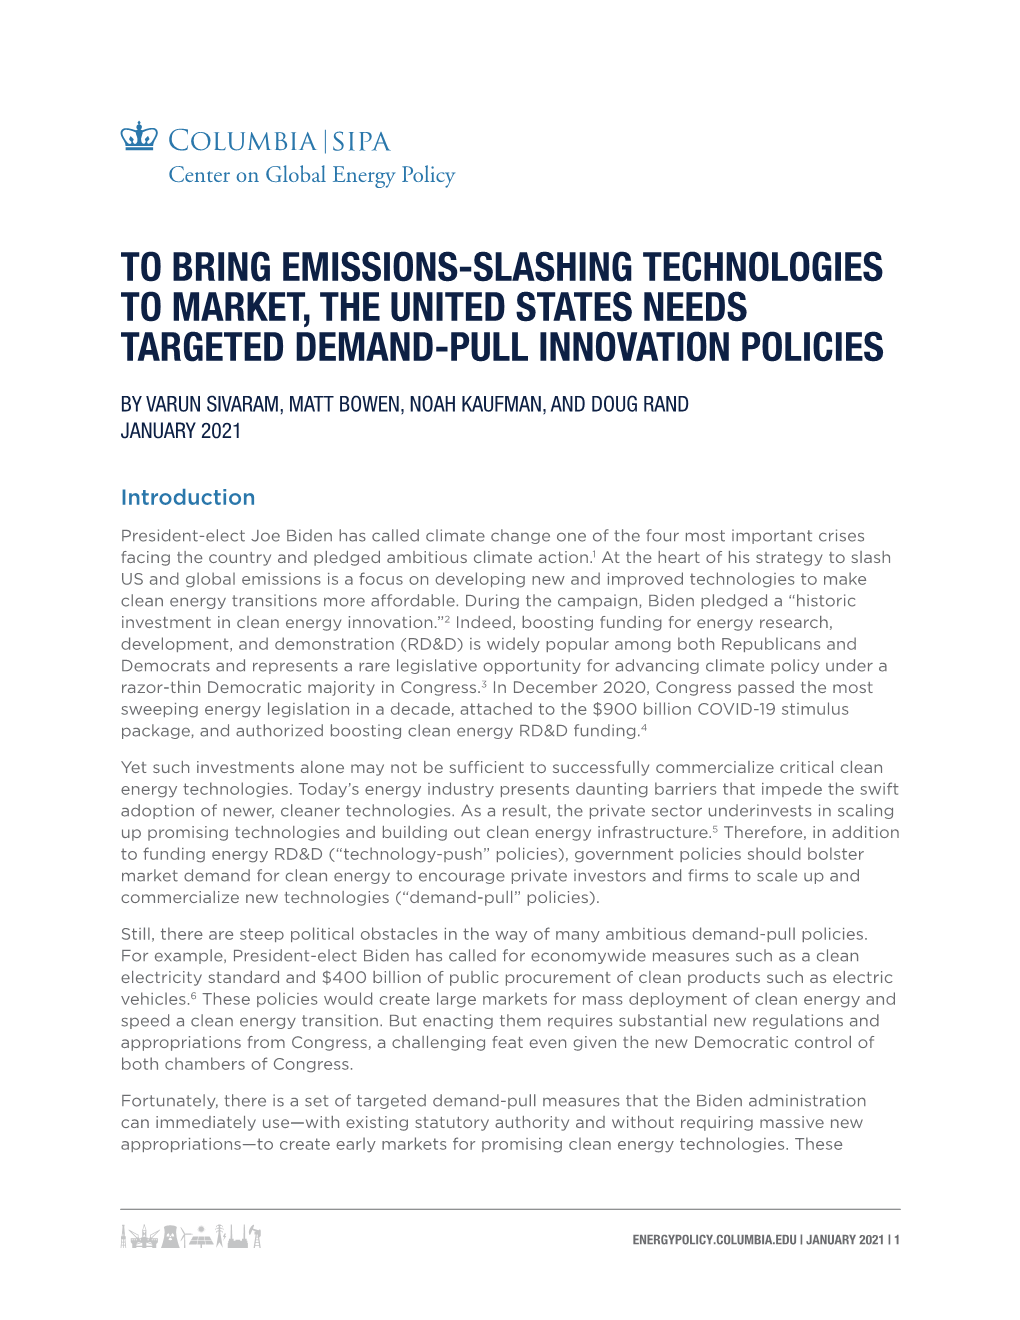 To Bring Emissions-Slashing Technologies to Market, the United States Needs Targeted Demand-Pull Innovation Policies